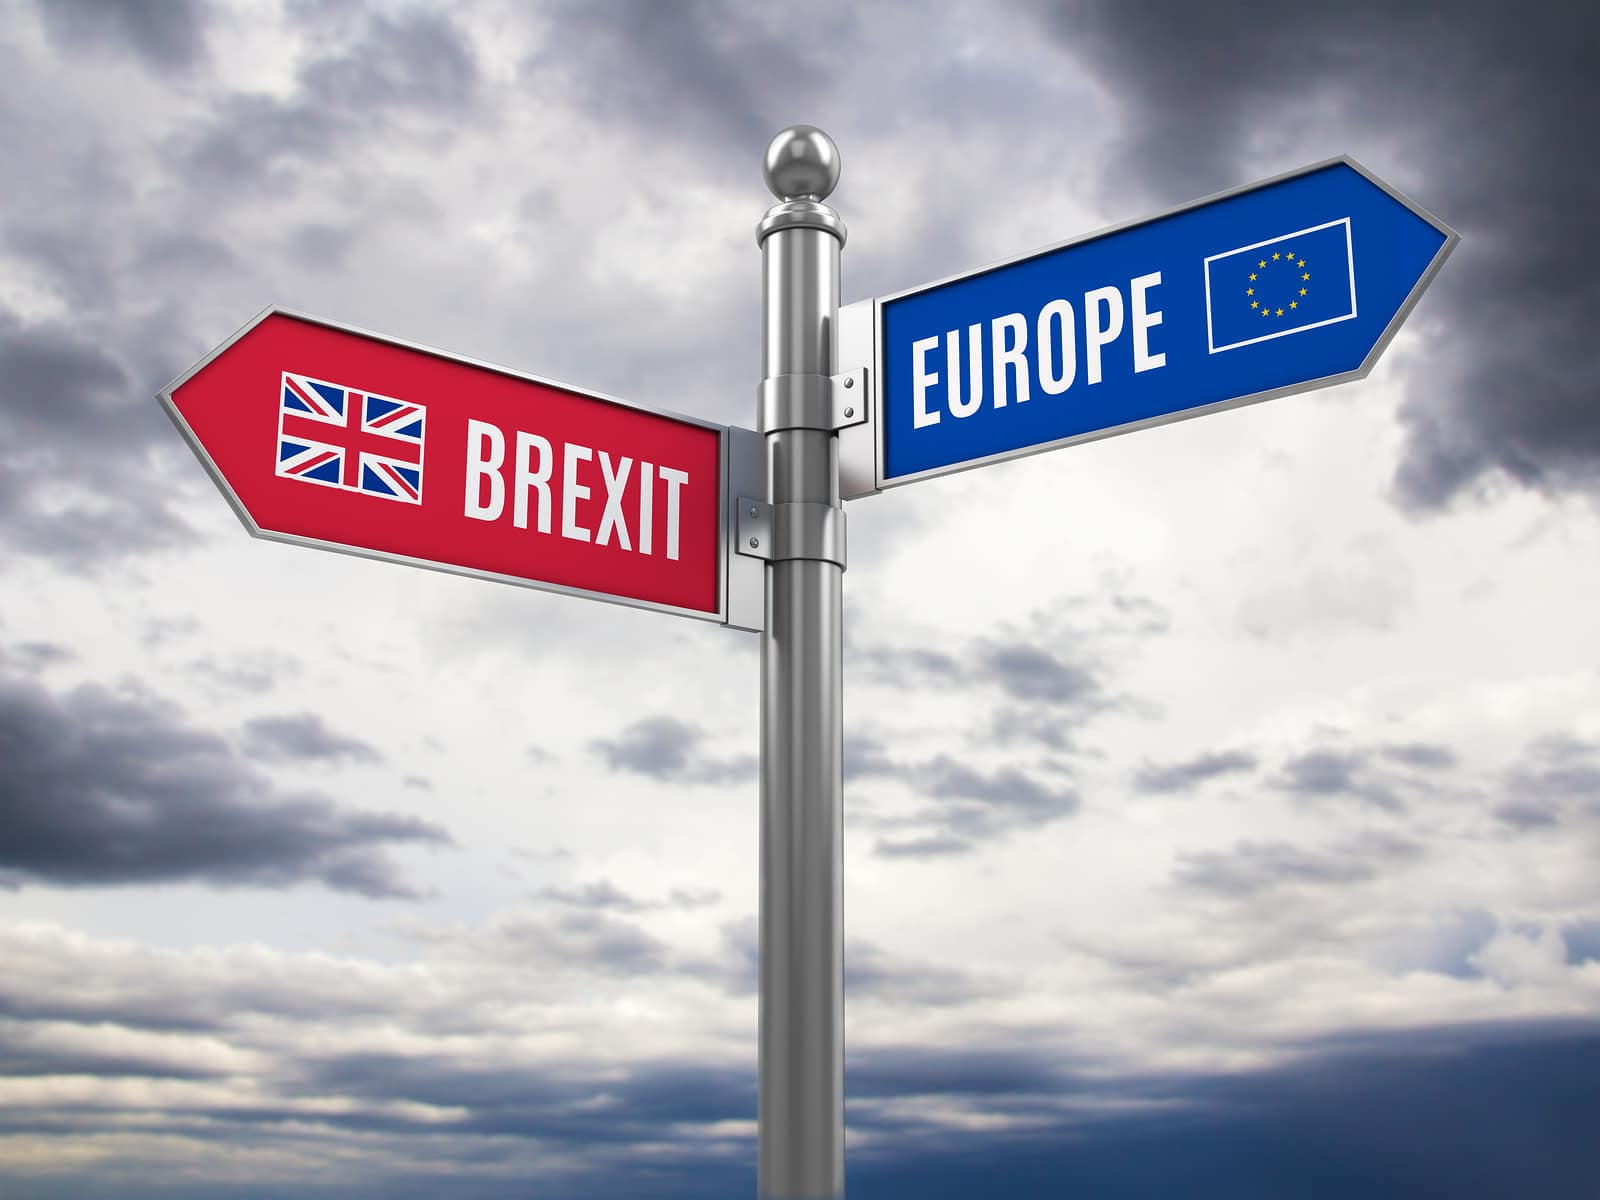 Euro and Brexit road signs with flags